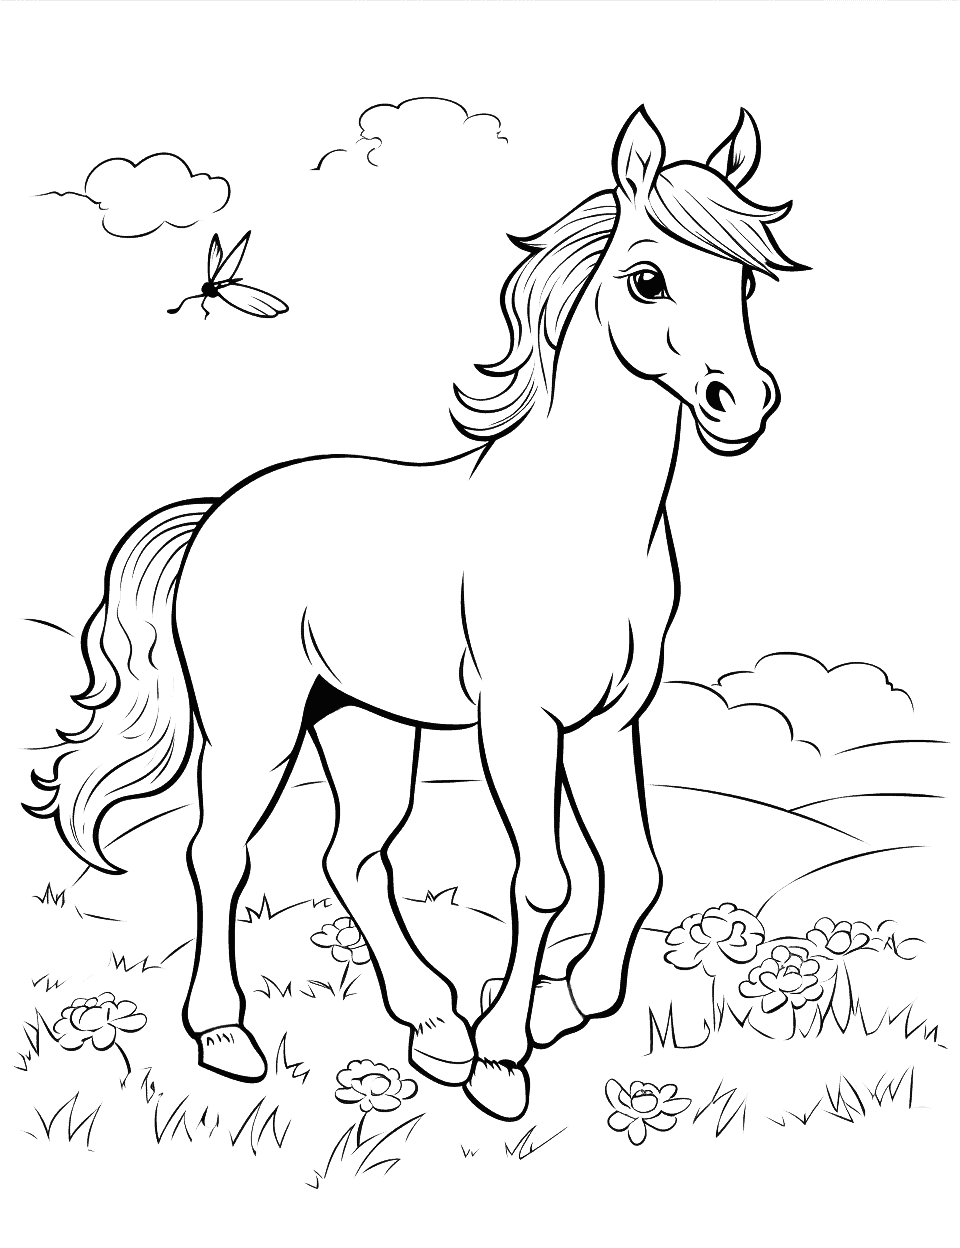 Cute Foal Playing Horse Coloring Page - A cute foal playing with butterflies in a sunny meadow.